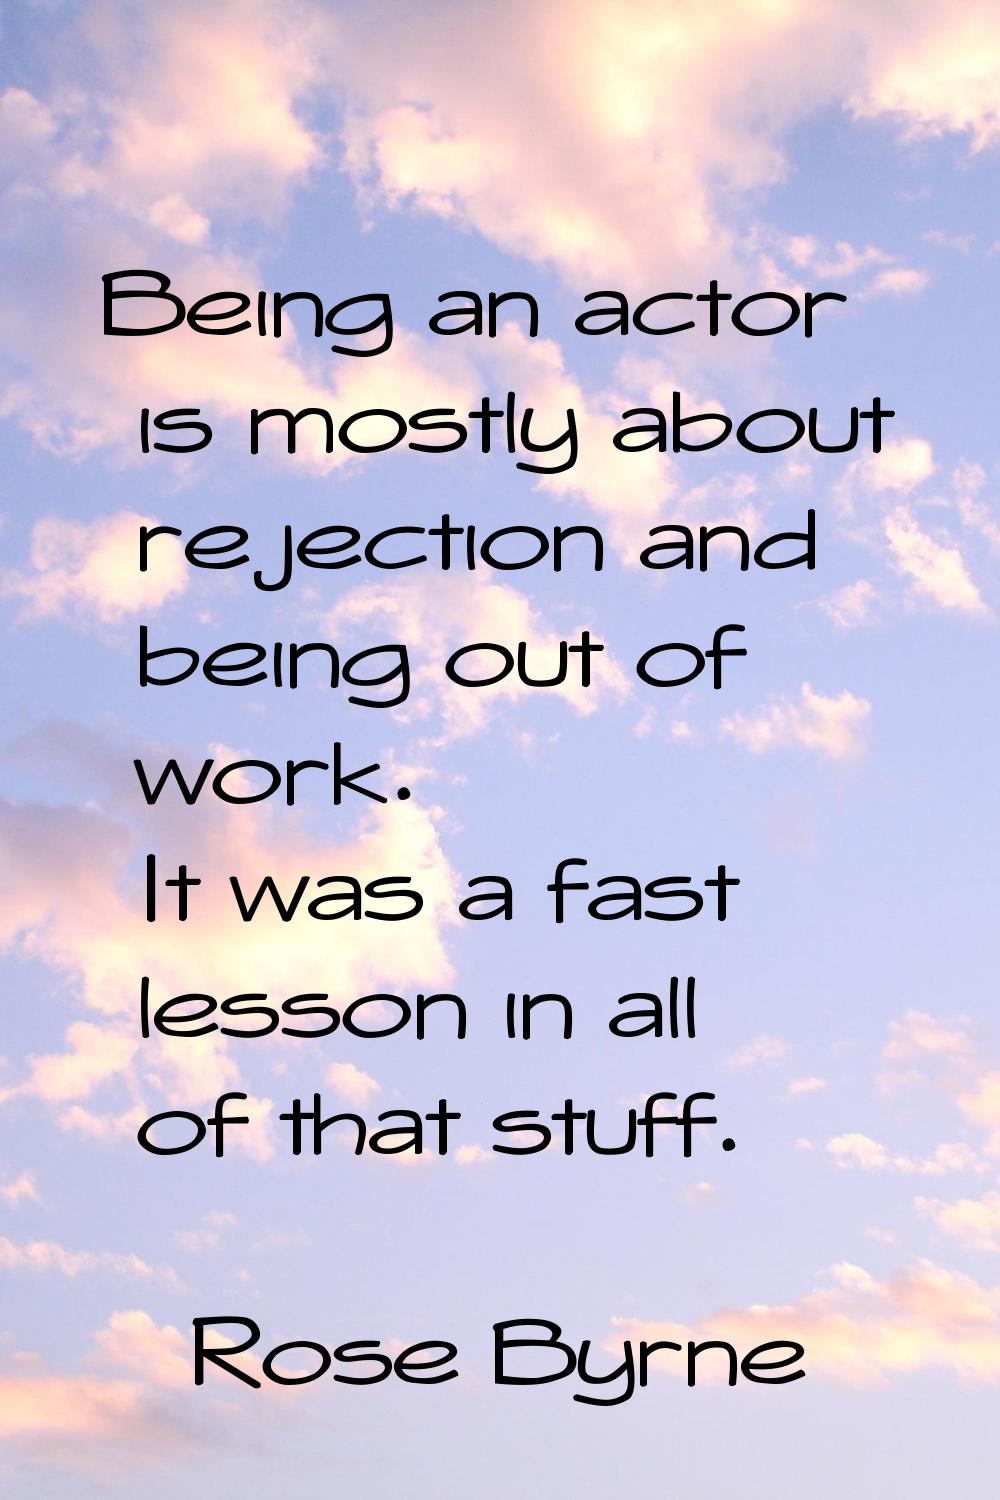 Being an actor is mostly about rejection and being out of work. It was a fast lesson in all of that